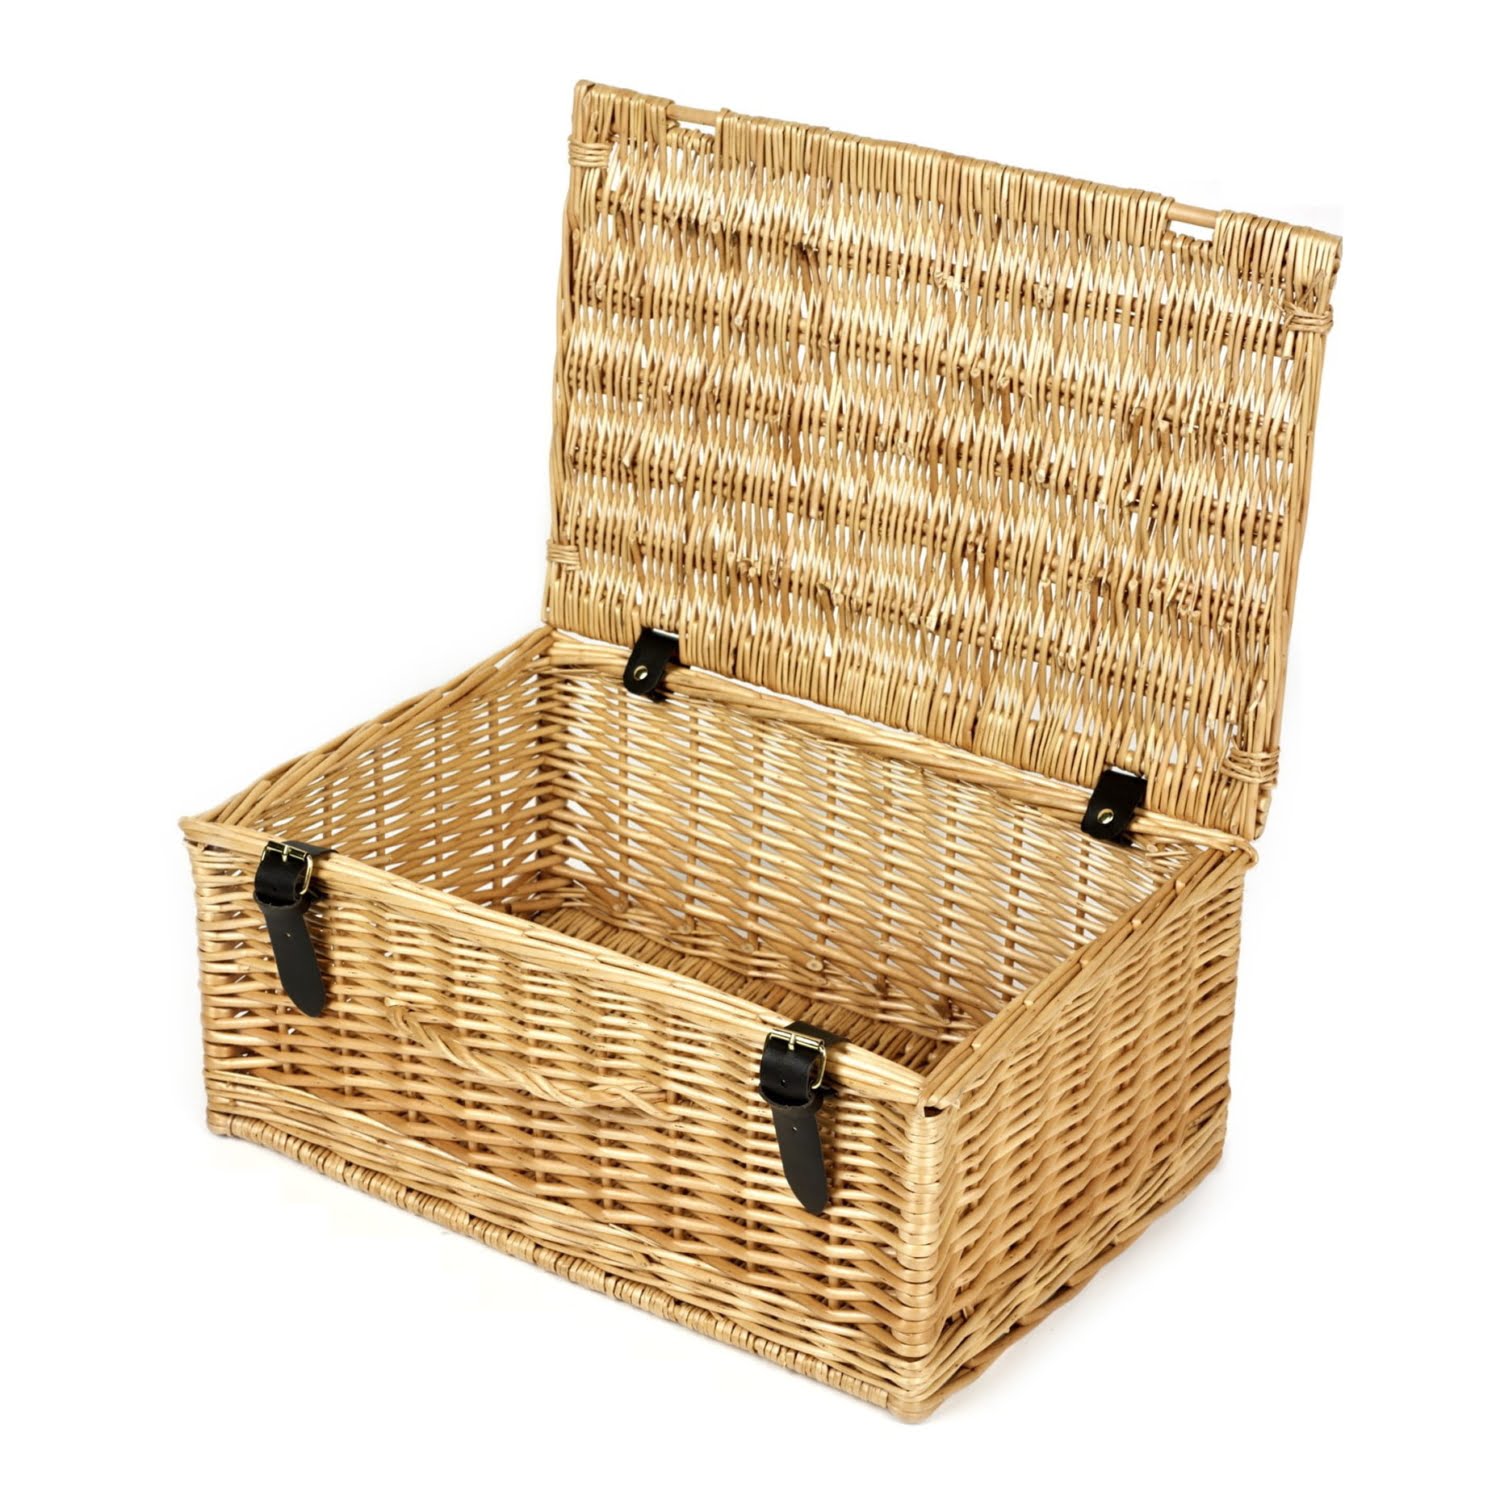 18 Inch Wicker Hamper Gift Basket - Pure Maple Syrup Wholesale